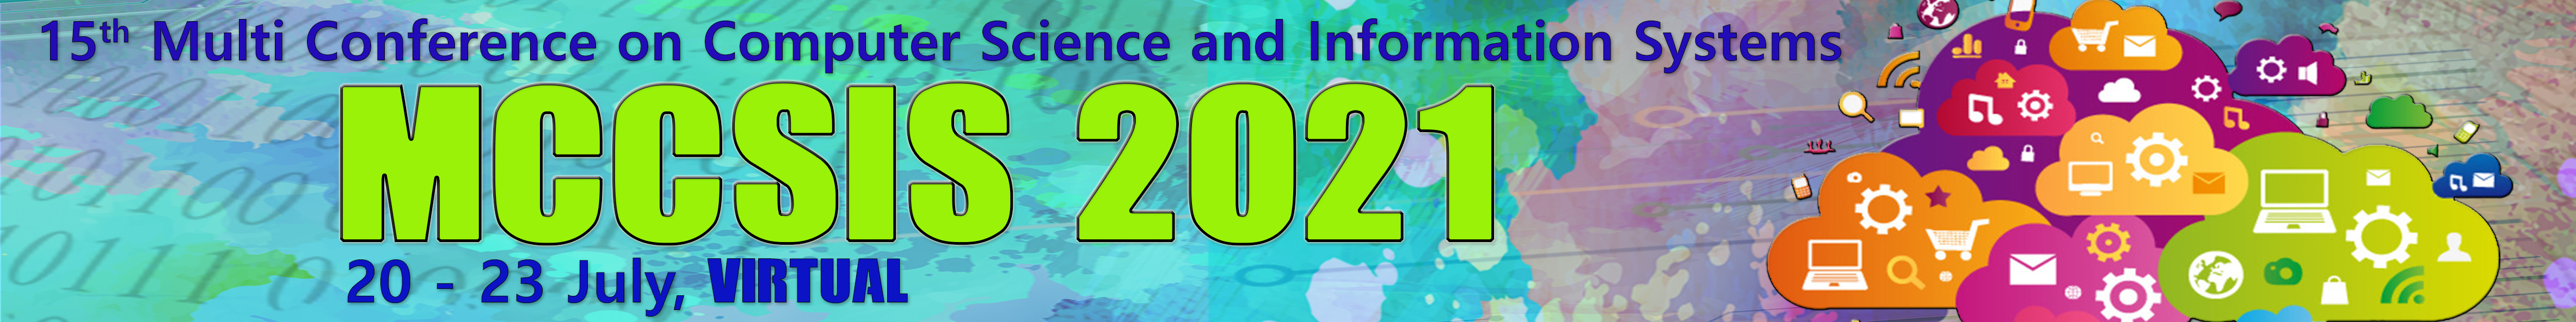 15th Multi Conference on Computer Science and Information Systems (MCCSIS 2021), Online event